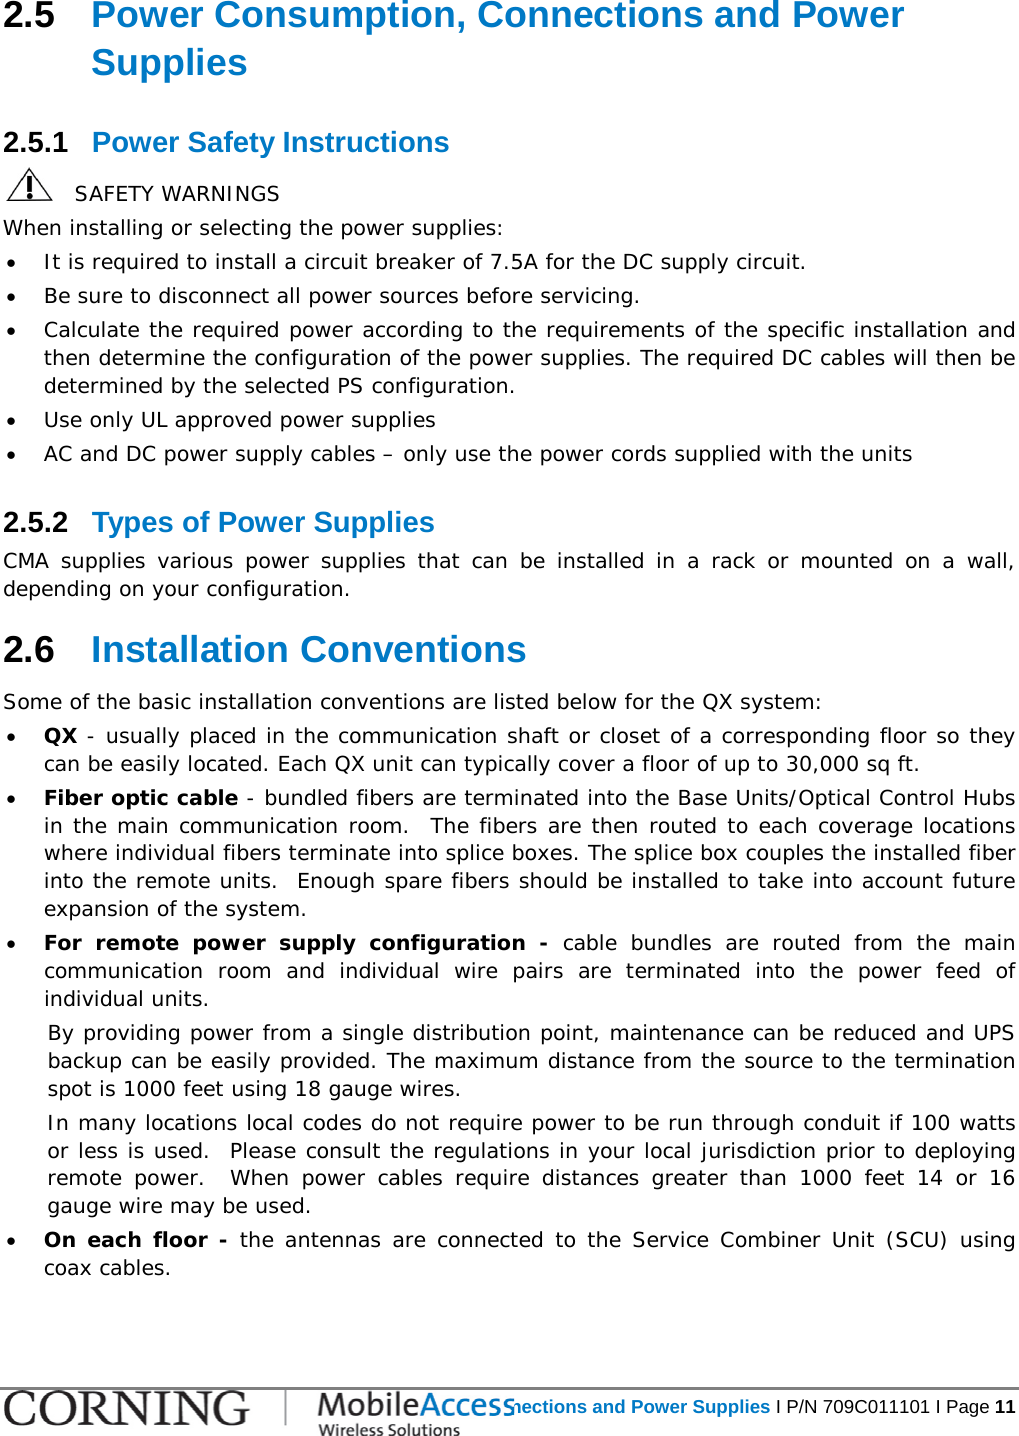   Power Consumption, Connections and Power Supplies I P/N 709C011101 I Page 11  2.5  Power Consumption, Connections and Power Supplies 2.5.1  Power Safety Instructions    SAFETY WARNINGS When installing or selecting the power supplies:  • It is required to install a circuit breaker of 7.5A for the DC supply circuit. • Be sure to disconnect all power sources before servicing. • Calculate the required power according to the requirements of the specific installation and then determine the configuration of the power supplies. The required DC cables will then be determined by the selected PS configuration. • Use only UL approved power supplies  • AC and DC power supply cables – only use the power cords supplied with the units  2.5.2  Types of Power Supplies CMA supplies various power supplies that can be installed in a rack or mounted on a wall, depending on your configuration.   2.6  Installation Conventions Some of the basic installation conventions are listed below for the QX system: • QX - usually placed in the communication shaft or closet of a corresponding floor so they can be easily located. Each QX unit can typically cover a floor of up to 30,000 sq ft. • Fiber optic cable - bundled fibers are terminated into the Base Units/Optical Control Hubs in the main communication room.  The fibers are then routed to each coverage locations where individual fibers terminate into splice boxes. The splice box couples the installed fiber into the remote units.  Enough spare fibers should be installed to take into account future expansion of the system.   • For remote power supply configuration -  cable bundles are routed from the main communication room and individual wire pairs are terminated into the power feed of individual units.   By providing power from a single distribution point, maintenance can be reduced and UPS backup can be easily provided. The maximum distance from the source to the termination spot is 1000 feet using 18 gauge wires.   In many locations local codes do not require power to be run through conduit if 100 watts or less is used.  Please consult the regulations in your local jurisdiction prior to deploying remote power.  When power cables require distances greater than 1000 feet 14 or 16 gauge wire may be used.    • On each floor - the antennas are connected to the Service Combiner Unit (SCU) using coax cables. 